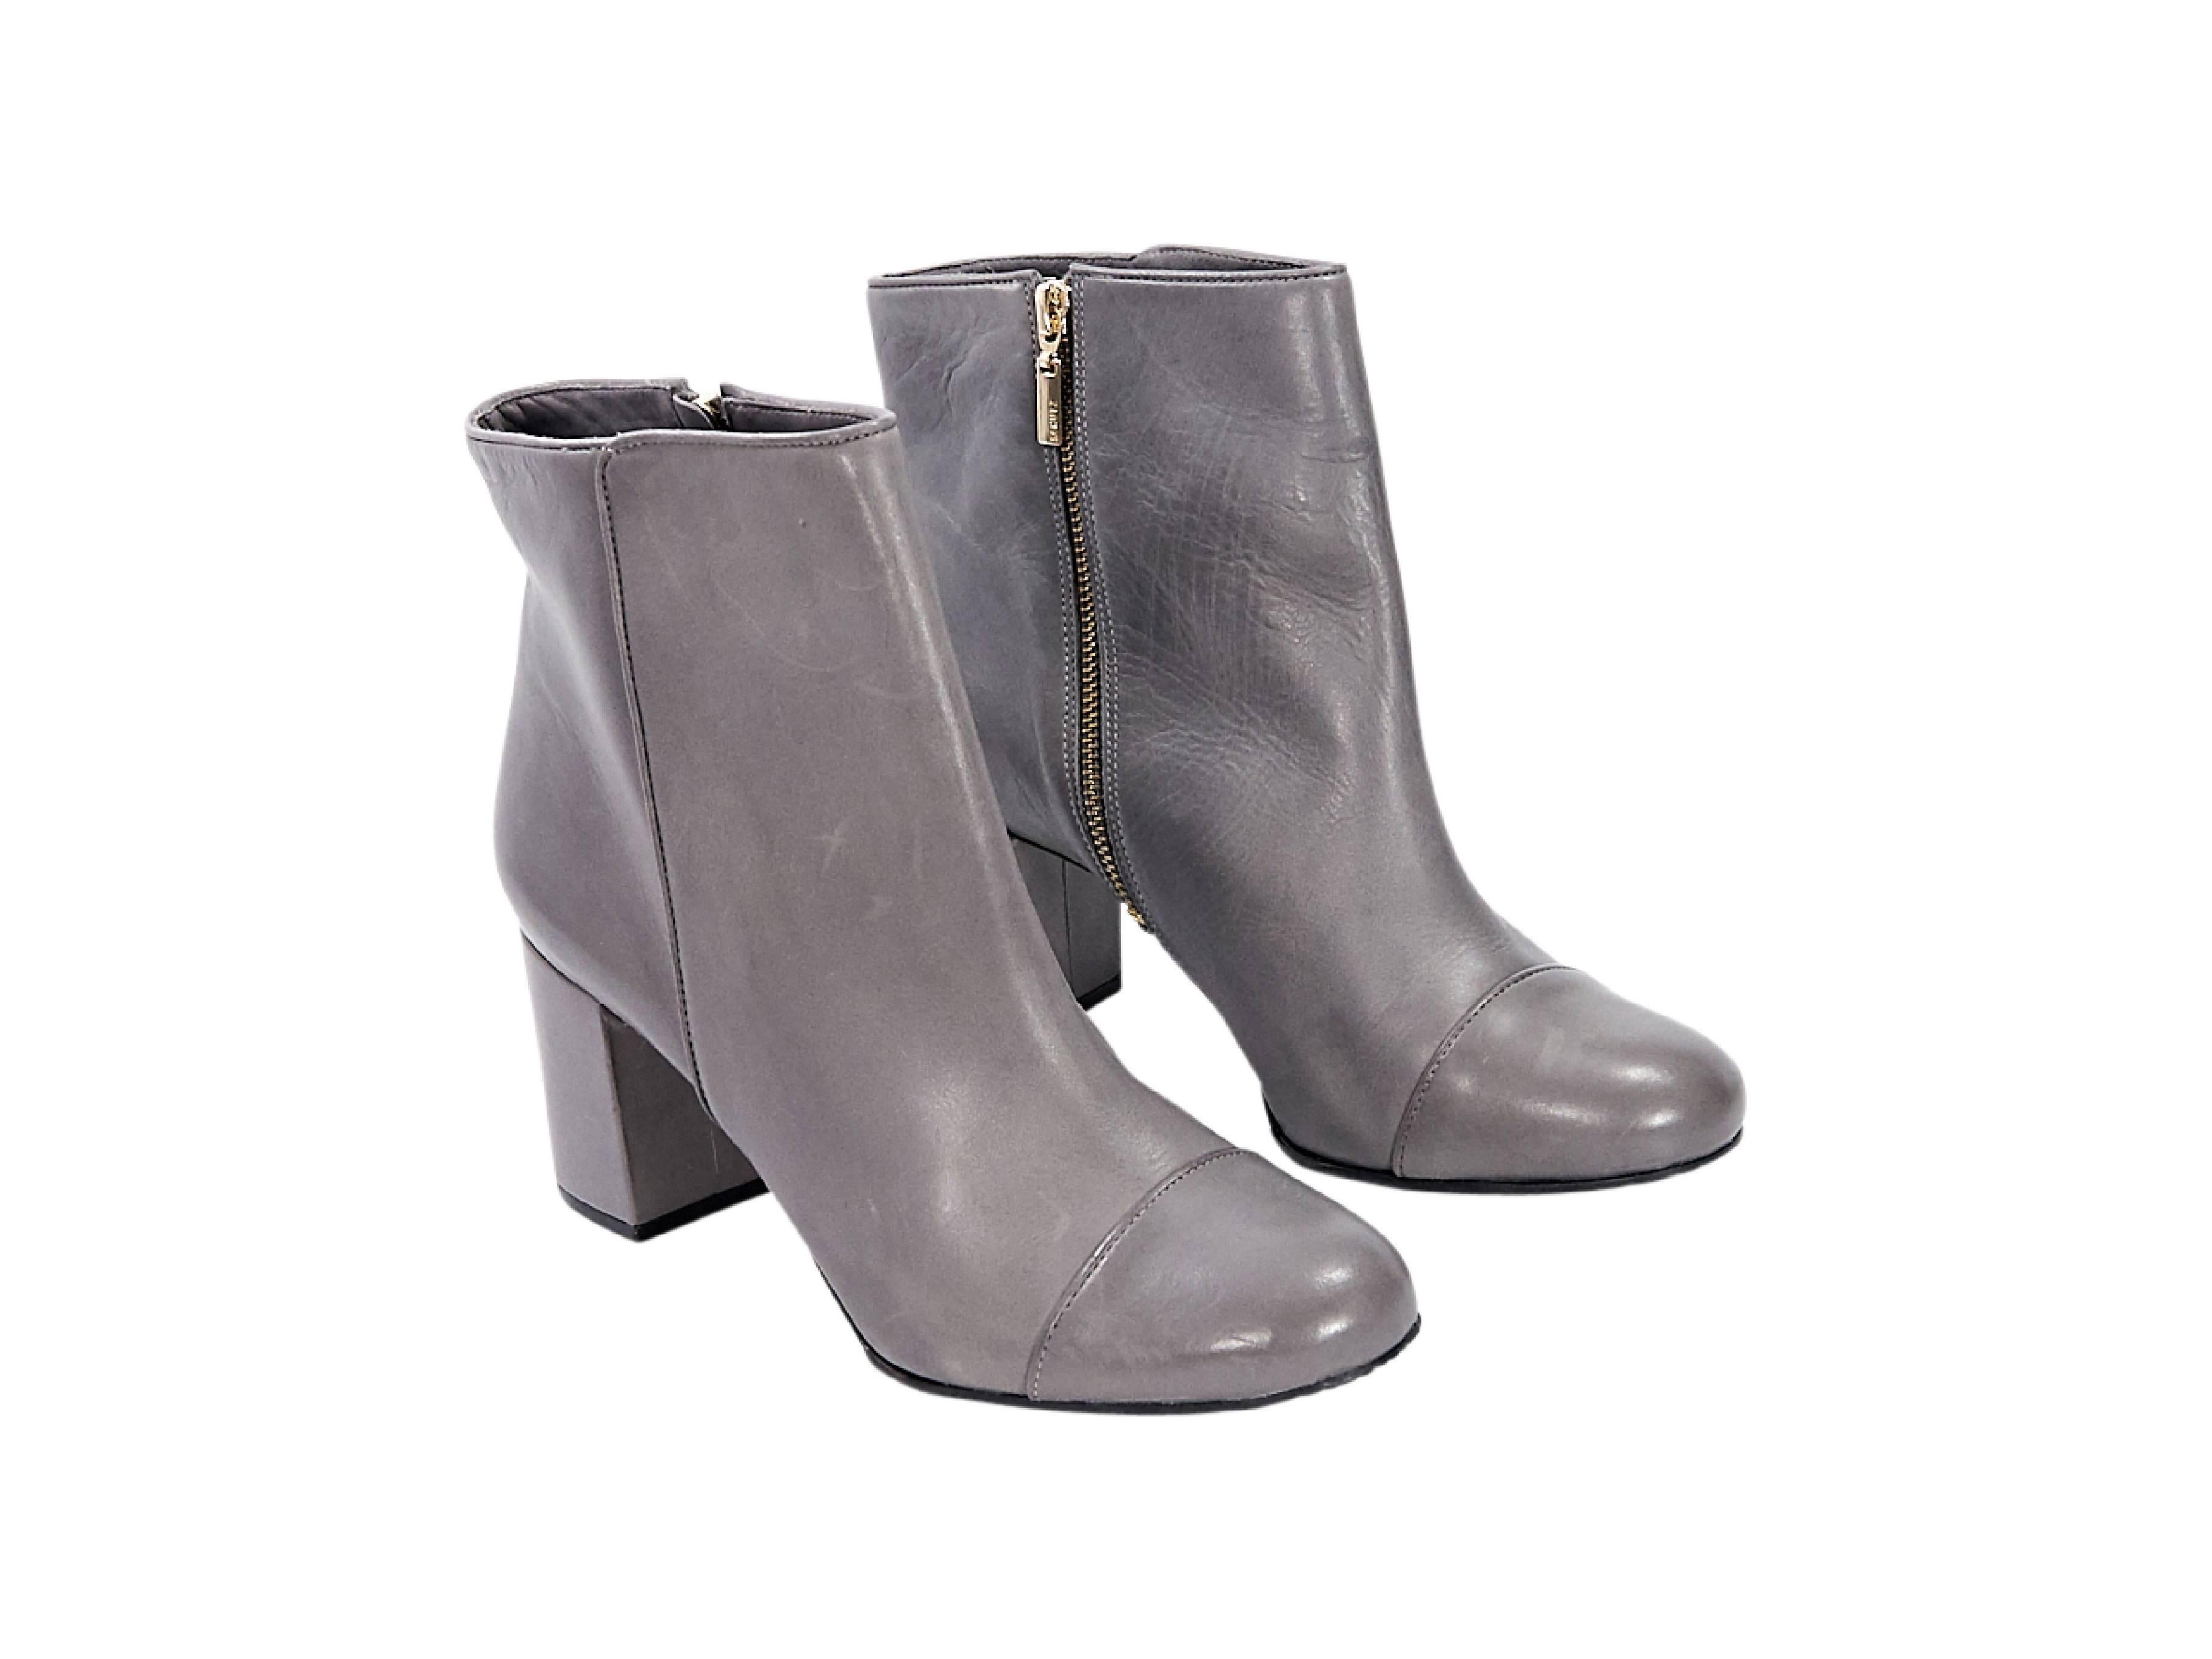 Product details:  Grey leather ankle boots by Schutz.  Inner zip closure.  Round cap toe.  Block heel. 
Condition: Pre-owned. Very good.
Est. Retail $ 598.00